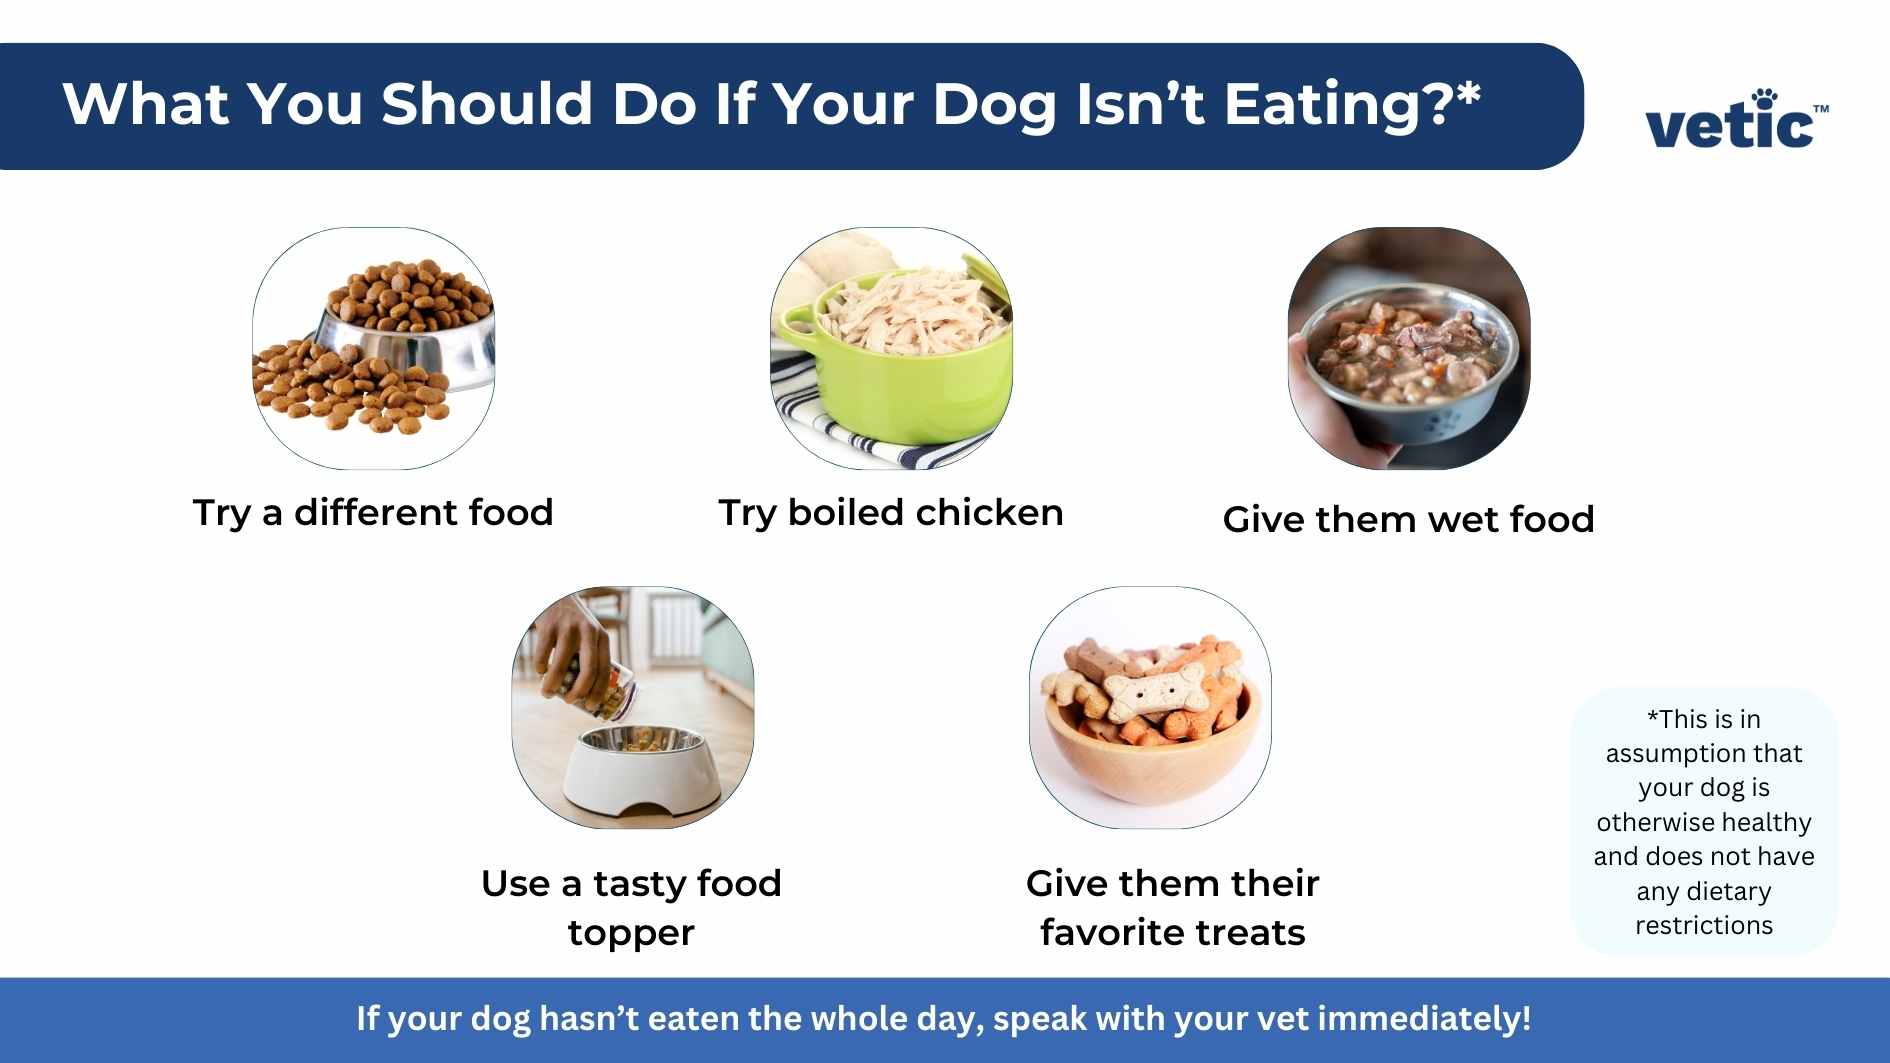 inforgaphic stating What You Should Do If Your Dog Isn’t Eating? Try a different food Try plain boiled chicken Put tasty dog food toppers Give them wet food Give them their favourite treats If your dog hasn’t eaten the whole day, speak with your vet immediately! *This is in assumption that your dog is otherwise healthy and does not have any dietary restrictions The infographic has the Vetic logo on the top right corner.